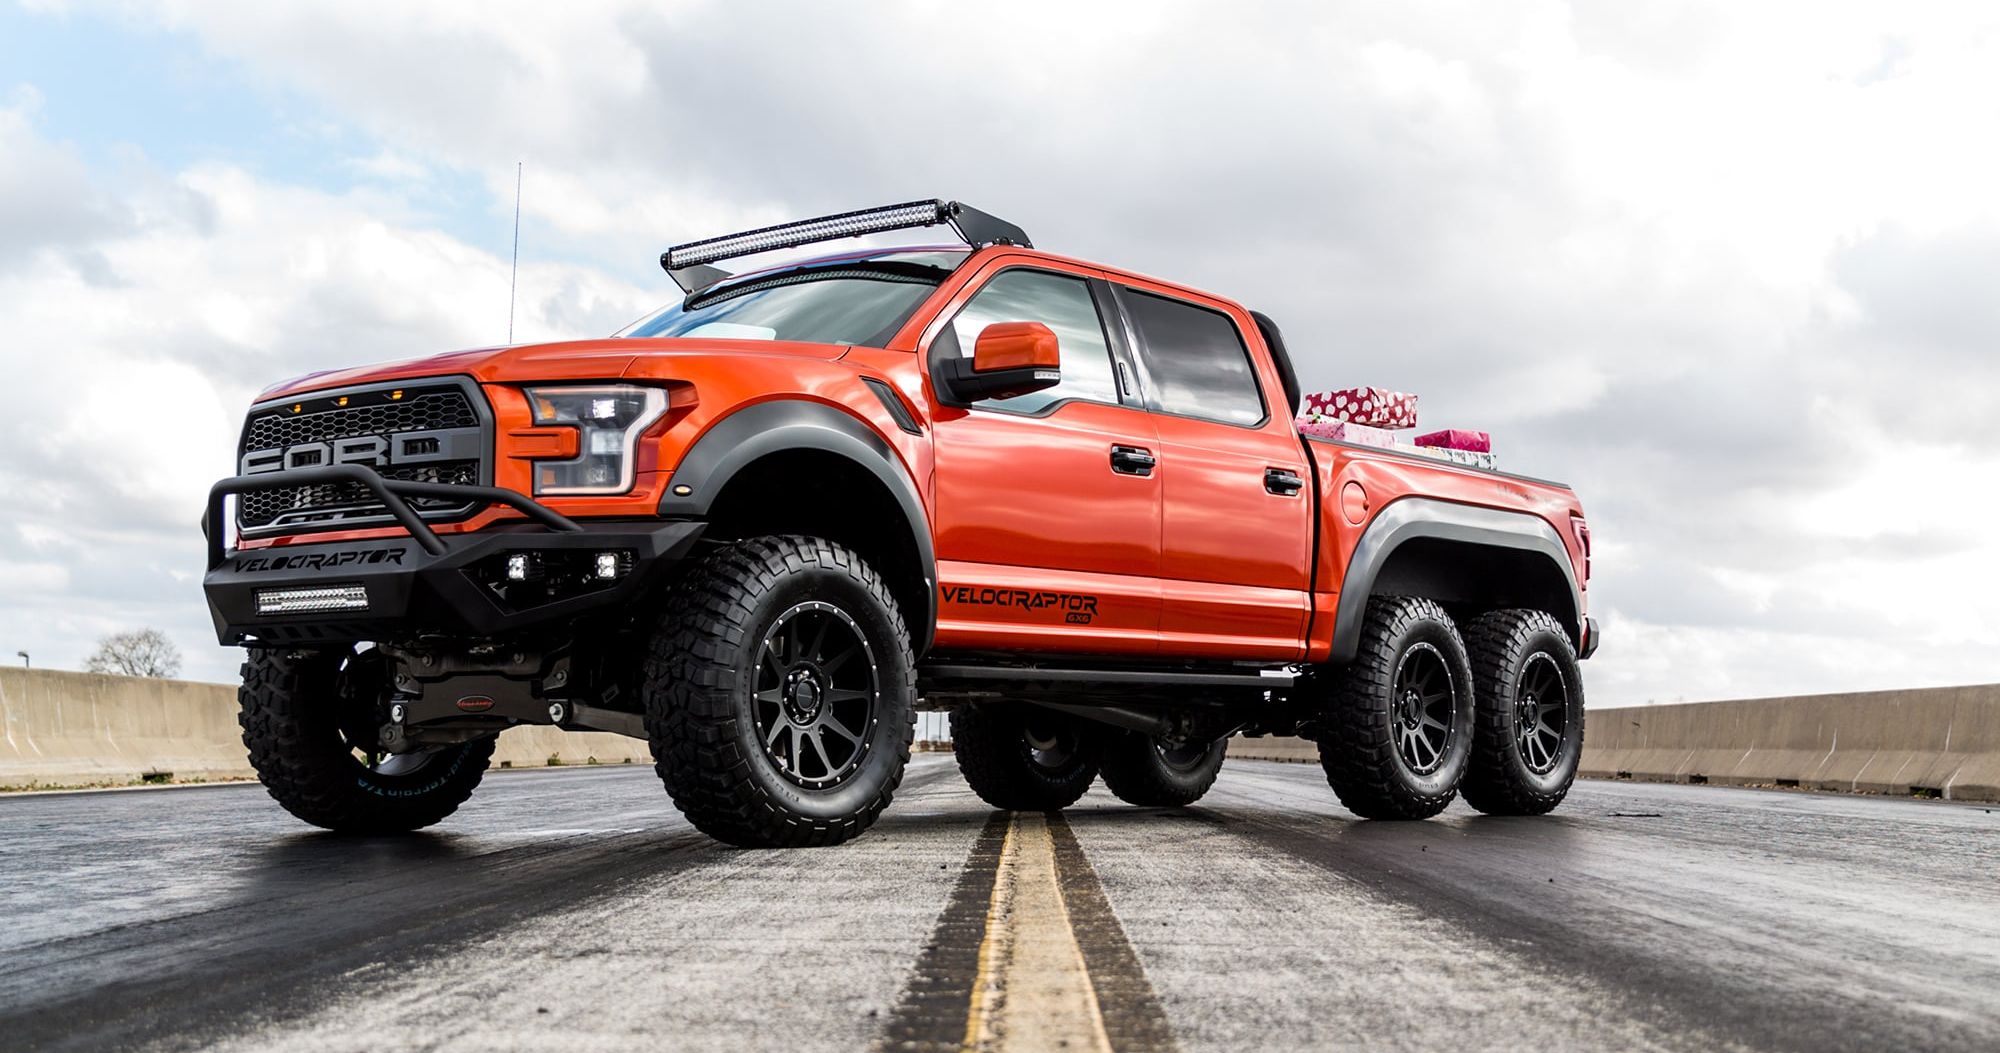 Hennessey Brings The Brawn With The Imposing Gen 3 VelociRaptor 6x6